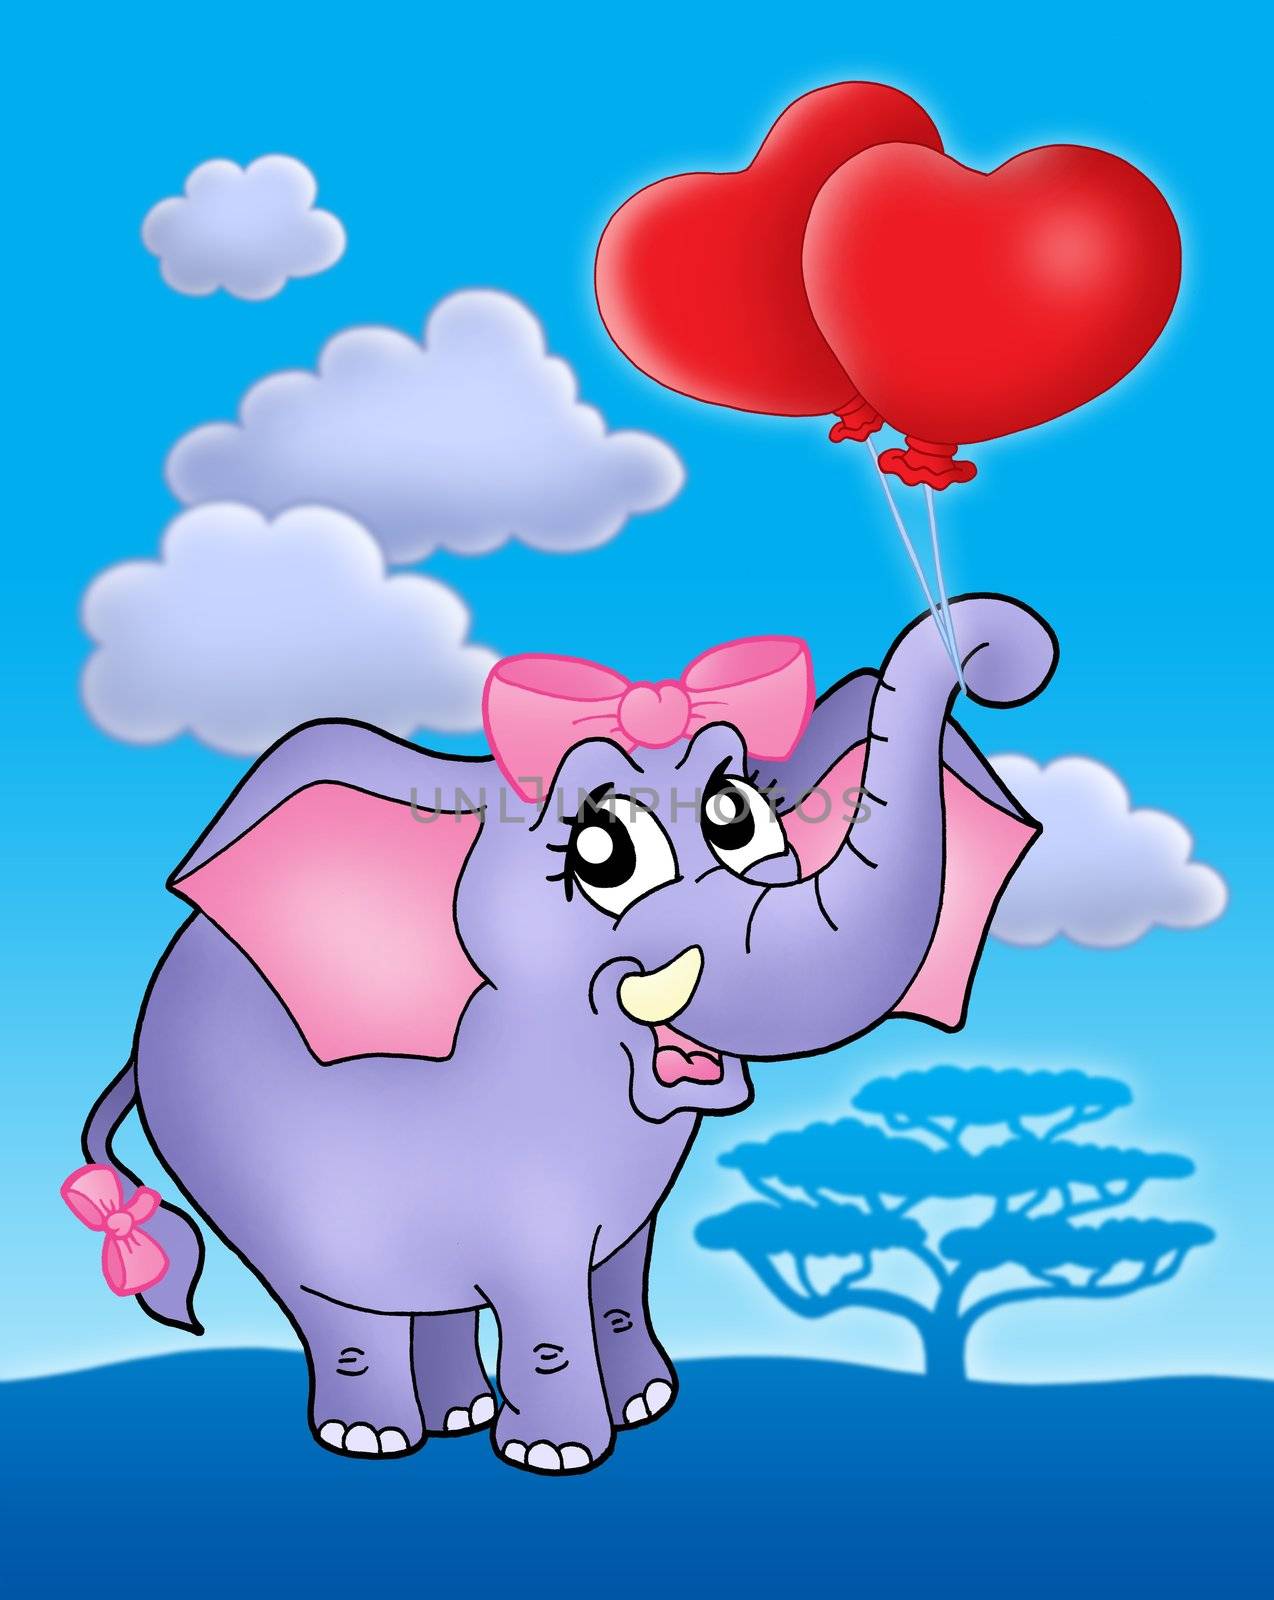 Elephant girl with heart balloons on blue sky by clairev